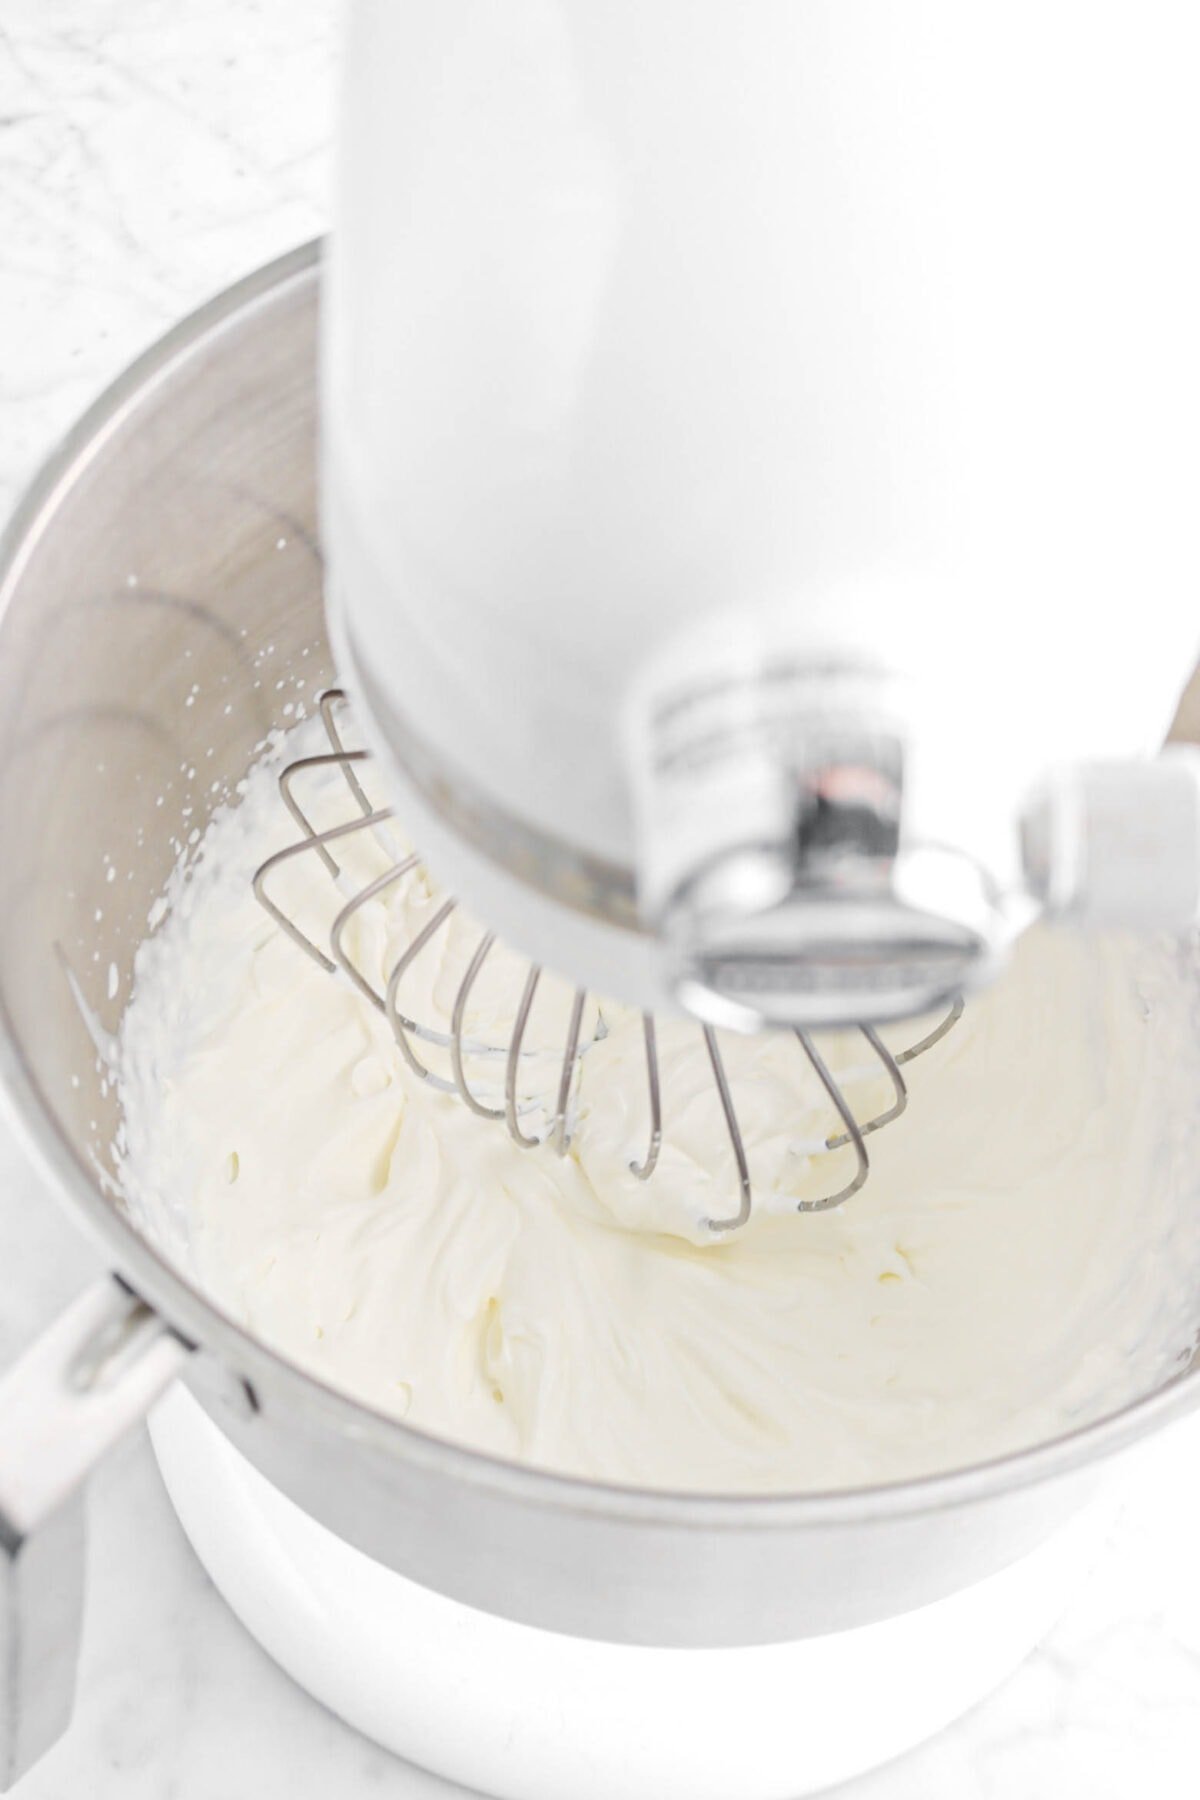 whipped heavy cream in mixer